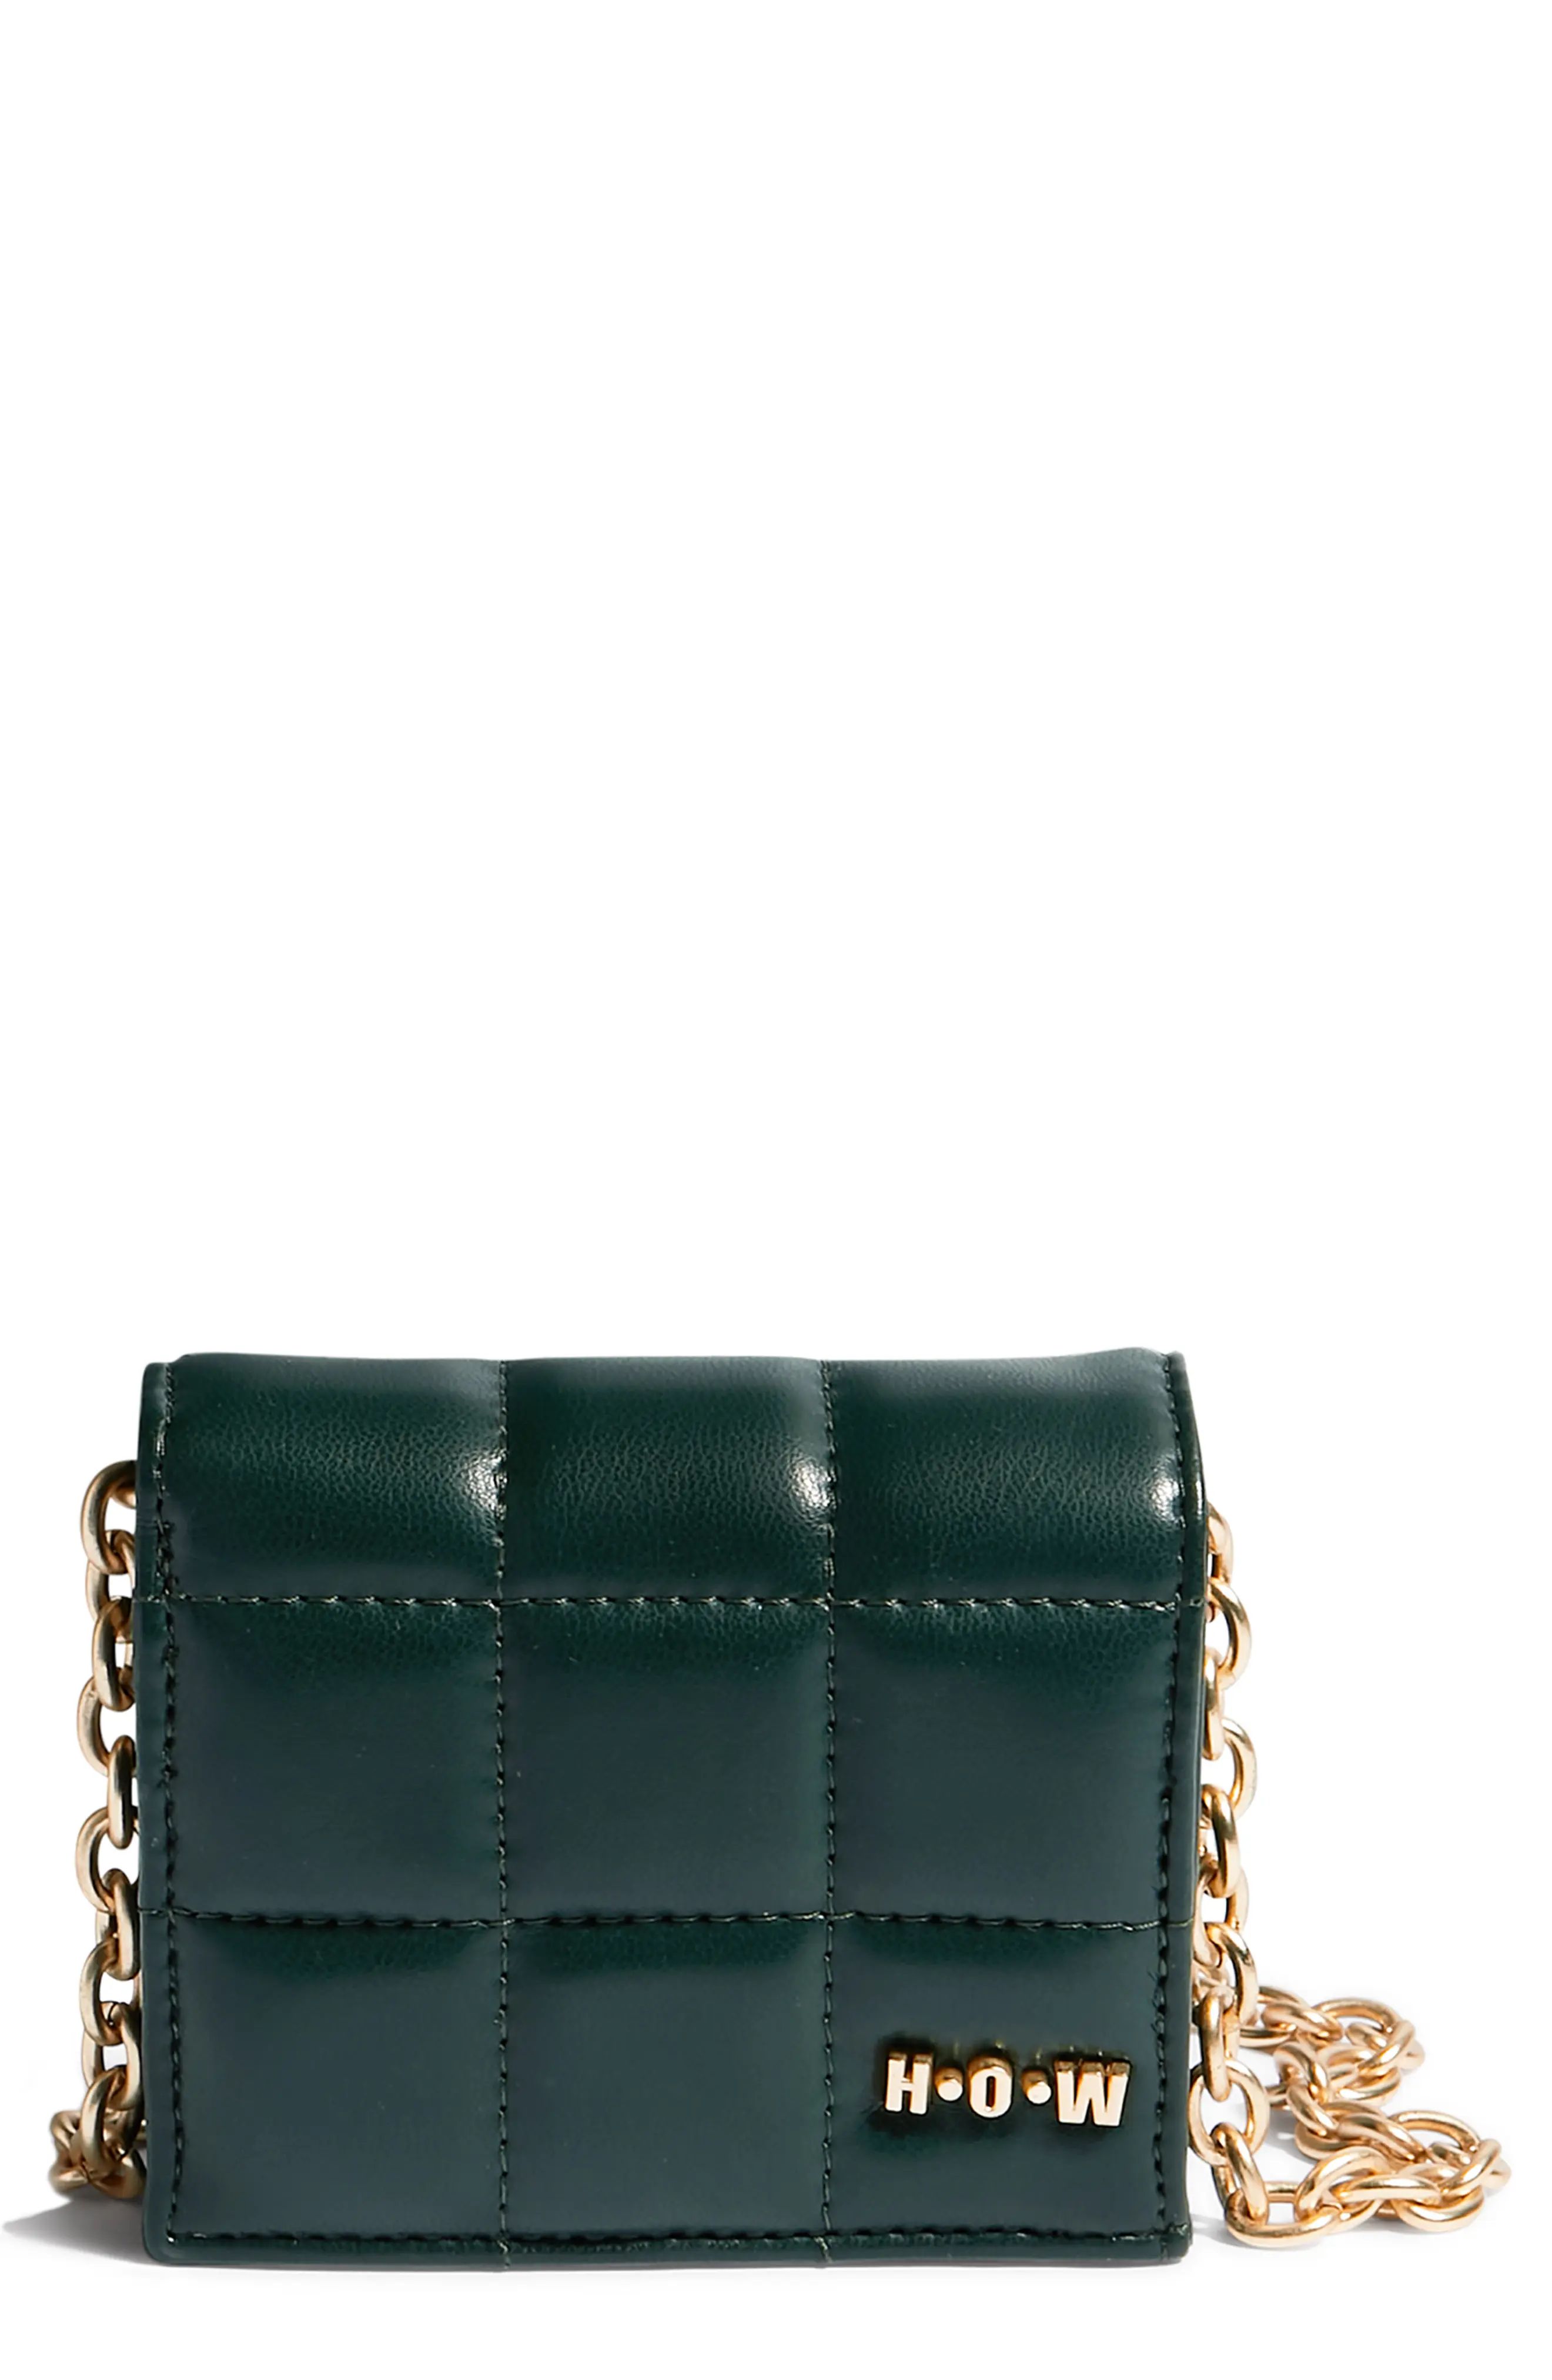 HOUSE OF WANT H.O.W. We Shop Vegan Leather Wallet Crossbody Bag in Hunter Green at Nordstrom | Nordstrom